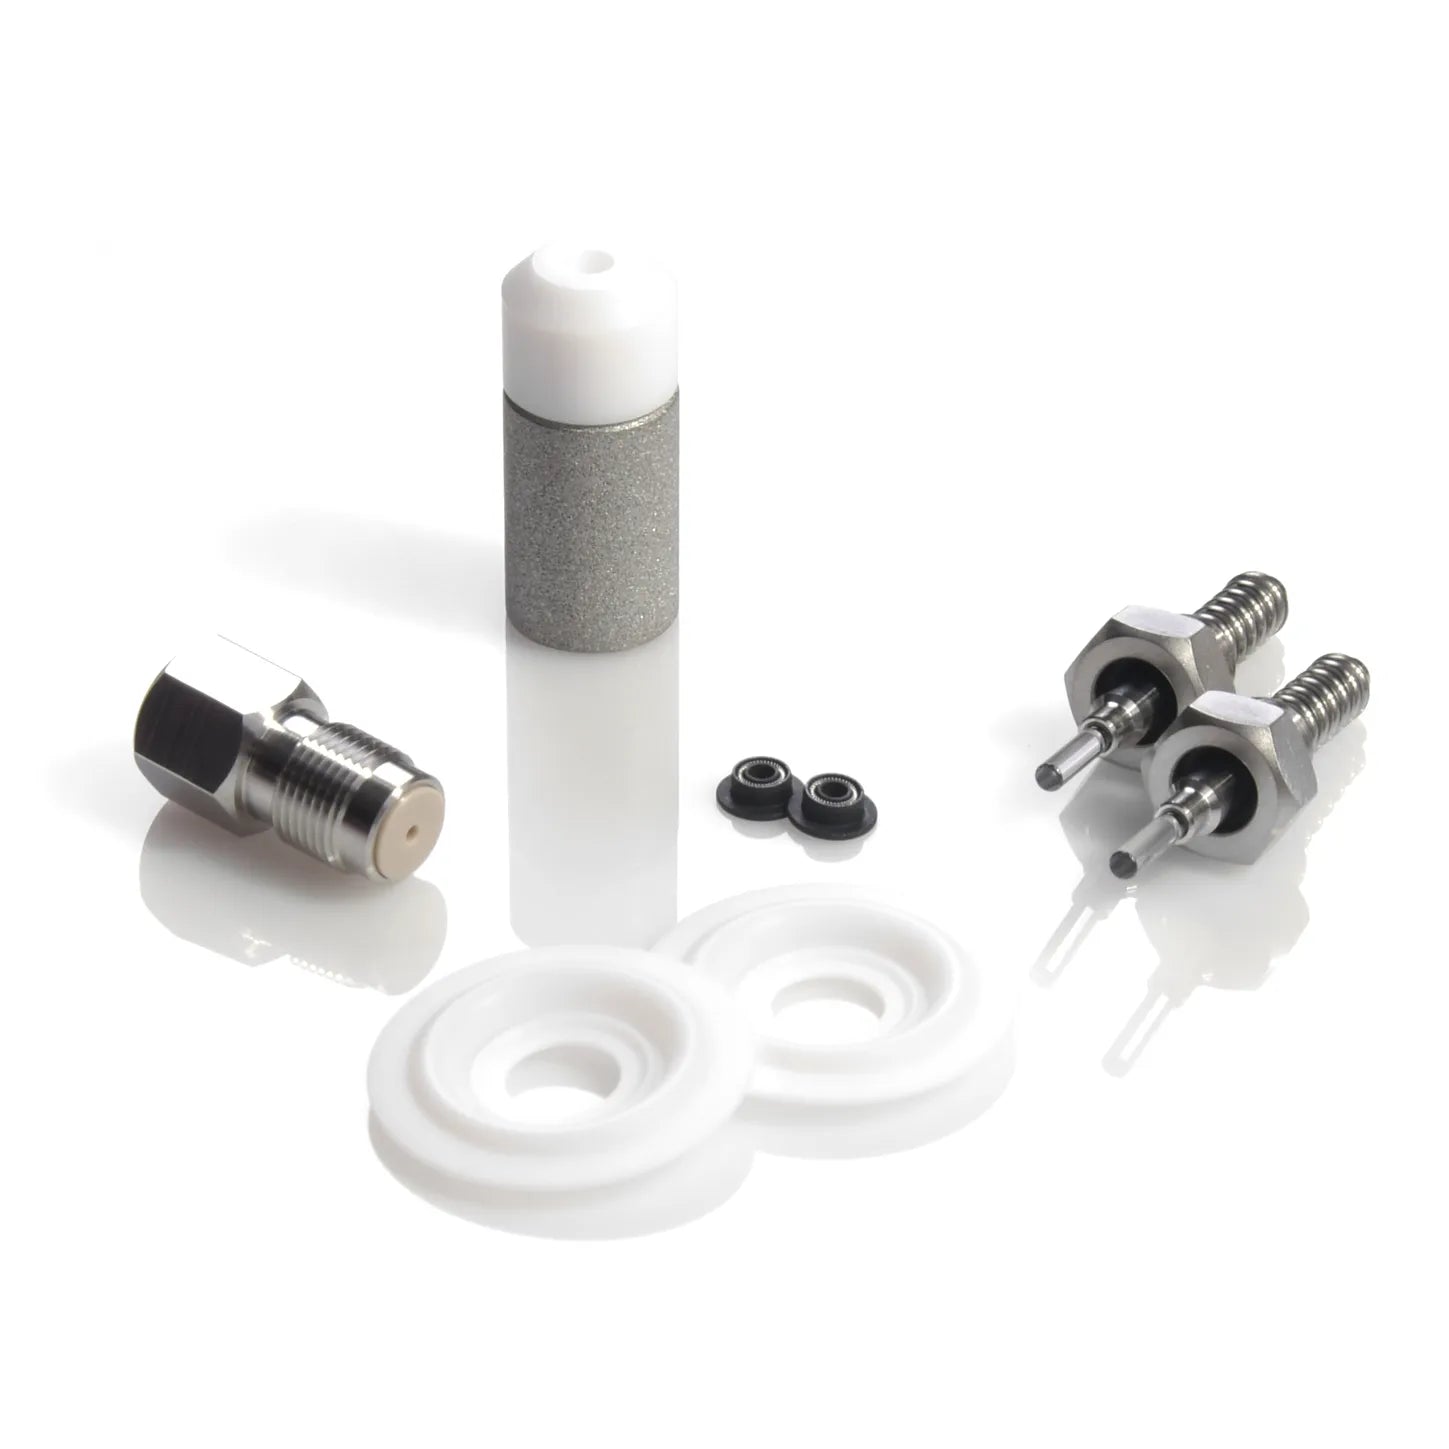 PM Kit, LC-20AD/AB, Comparable to Sciex™ # 4444114